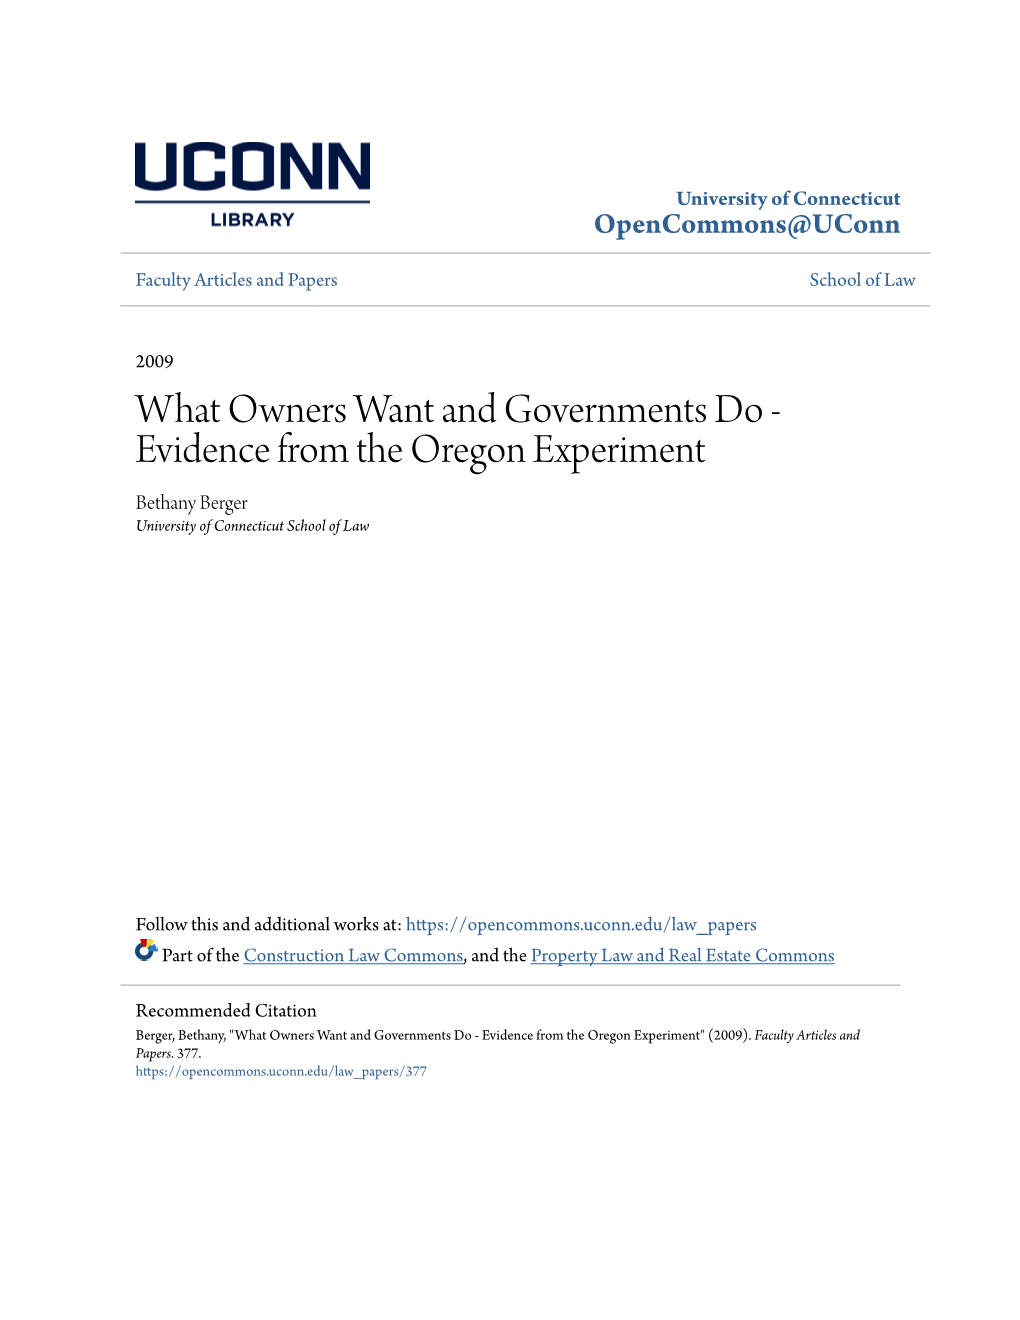 What Owners Want and Governments Do - Evidence from the Oregon Experiment Bethany Berger University of Connecticut School of Law